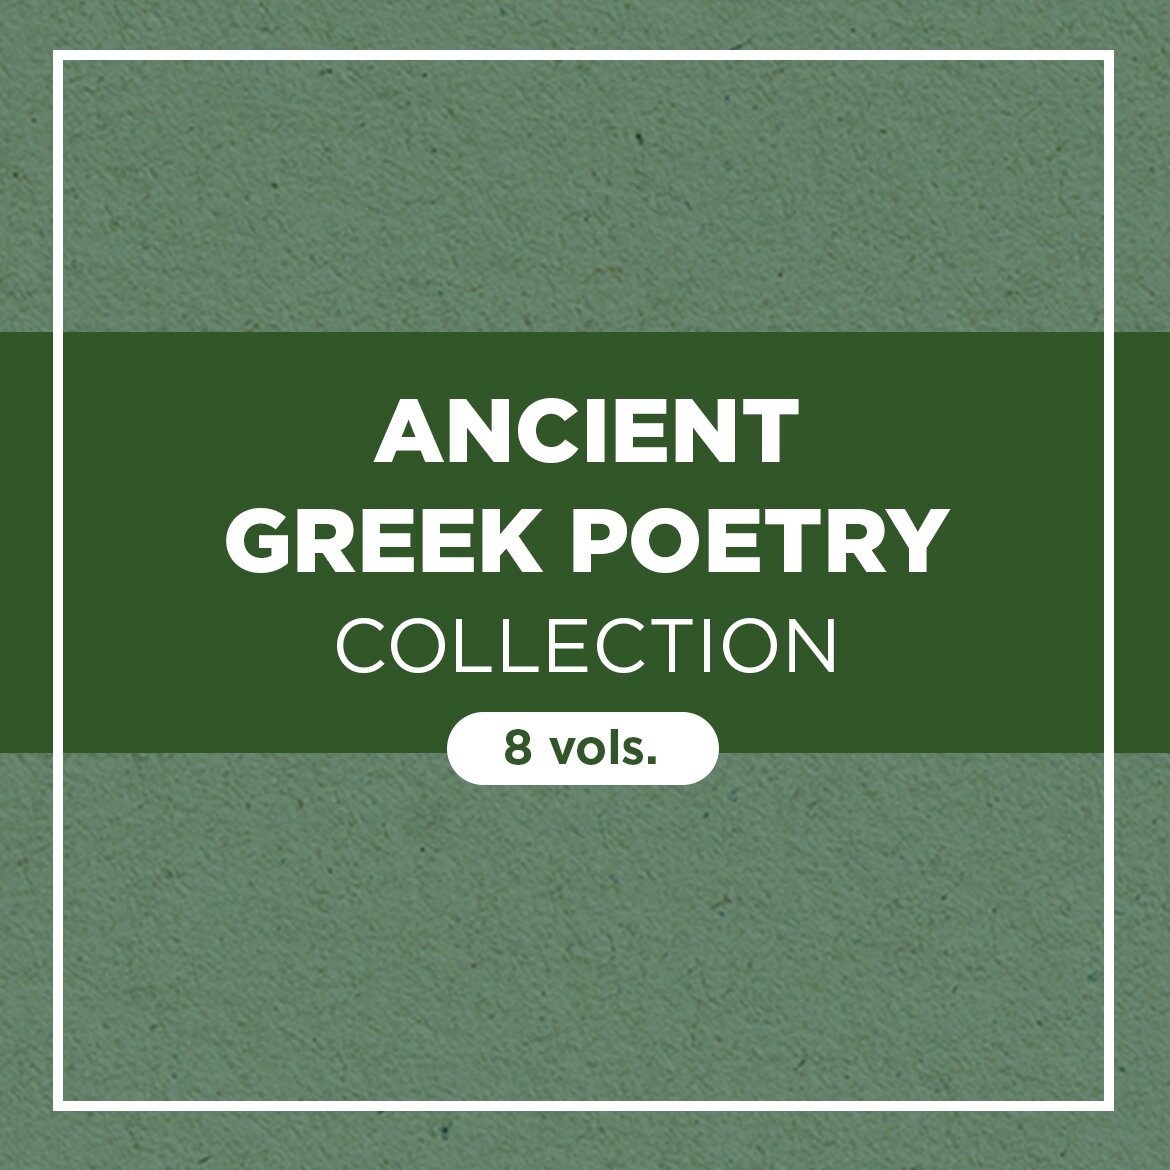 Ancient Greek Poetry Collection (8 vols.)